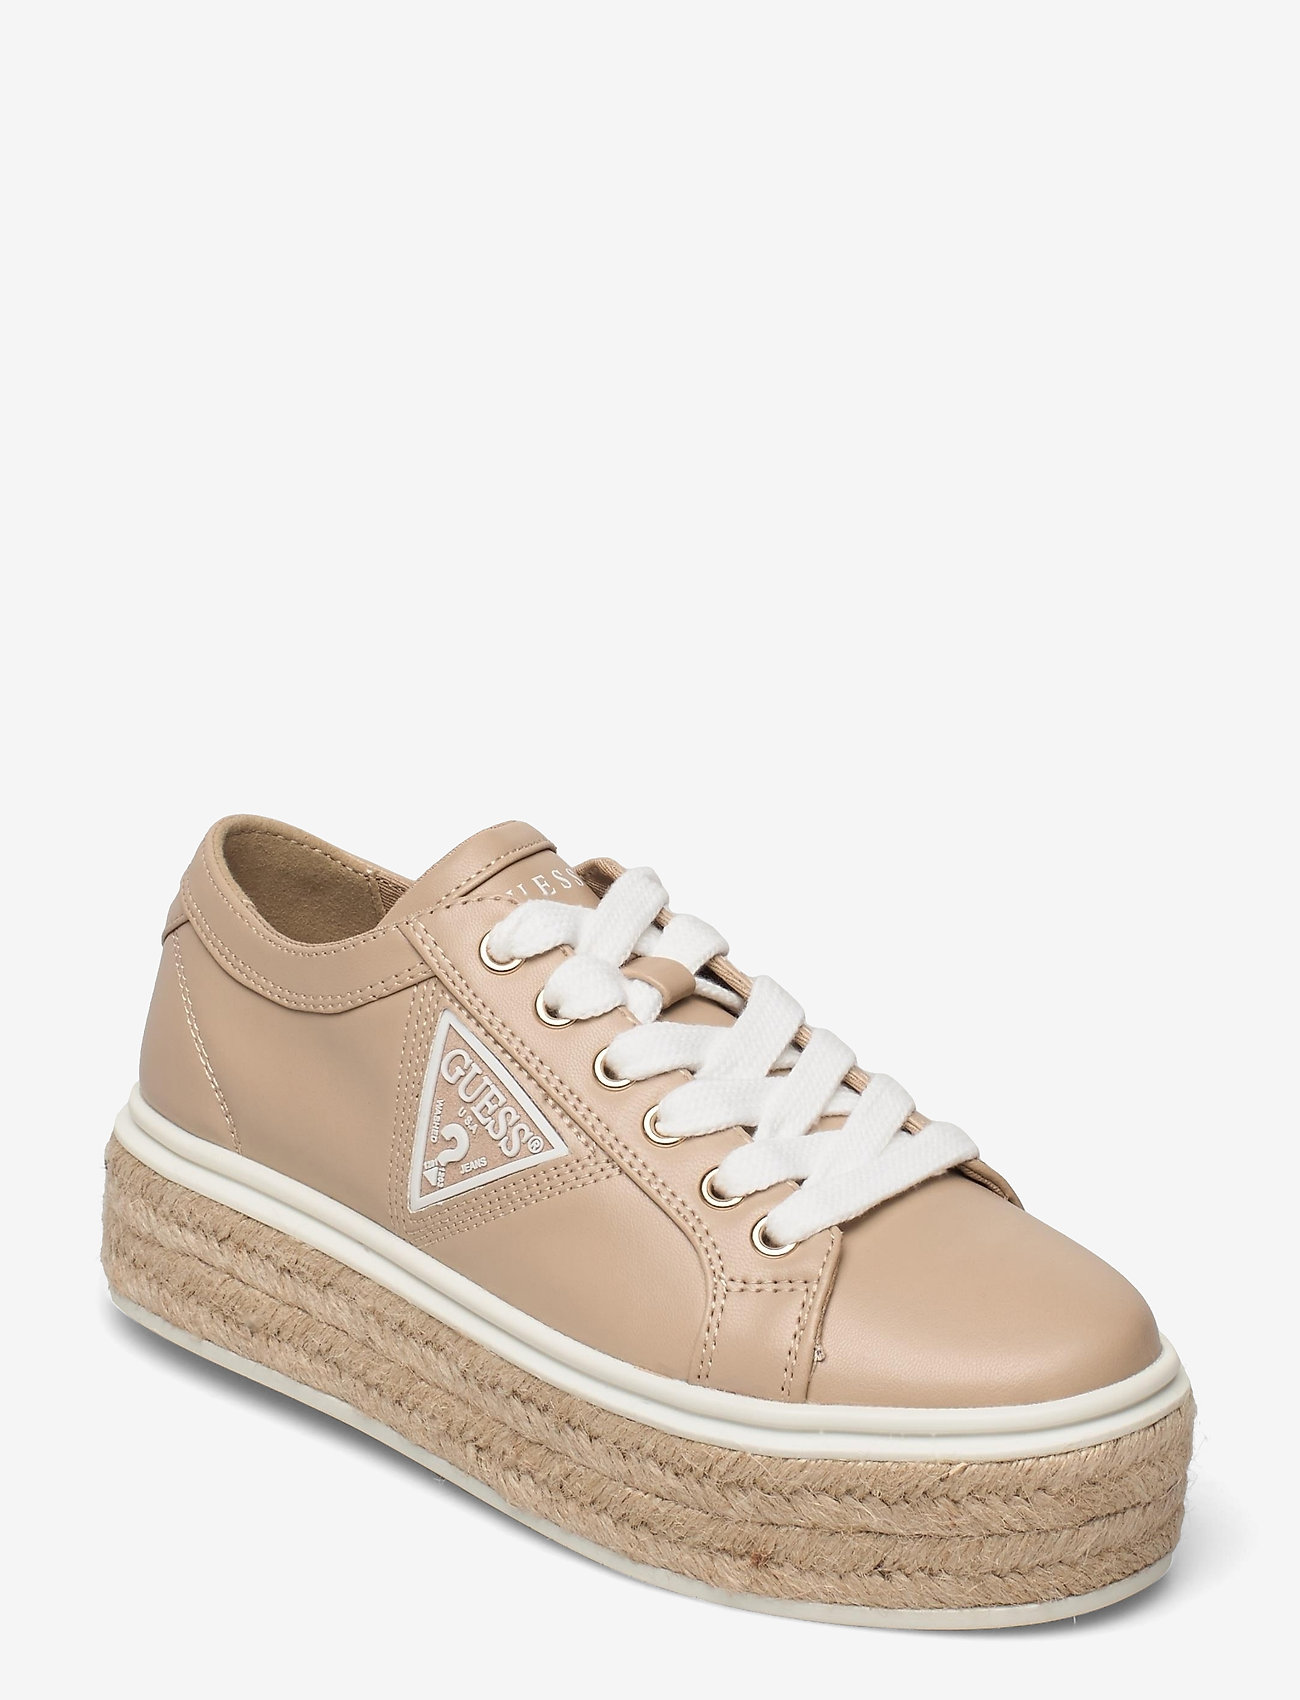 præmedicinering andrageren Diagnose GUESS Propert/active Lady/fabric - Lave sneakers | Boozt.com